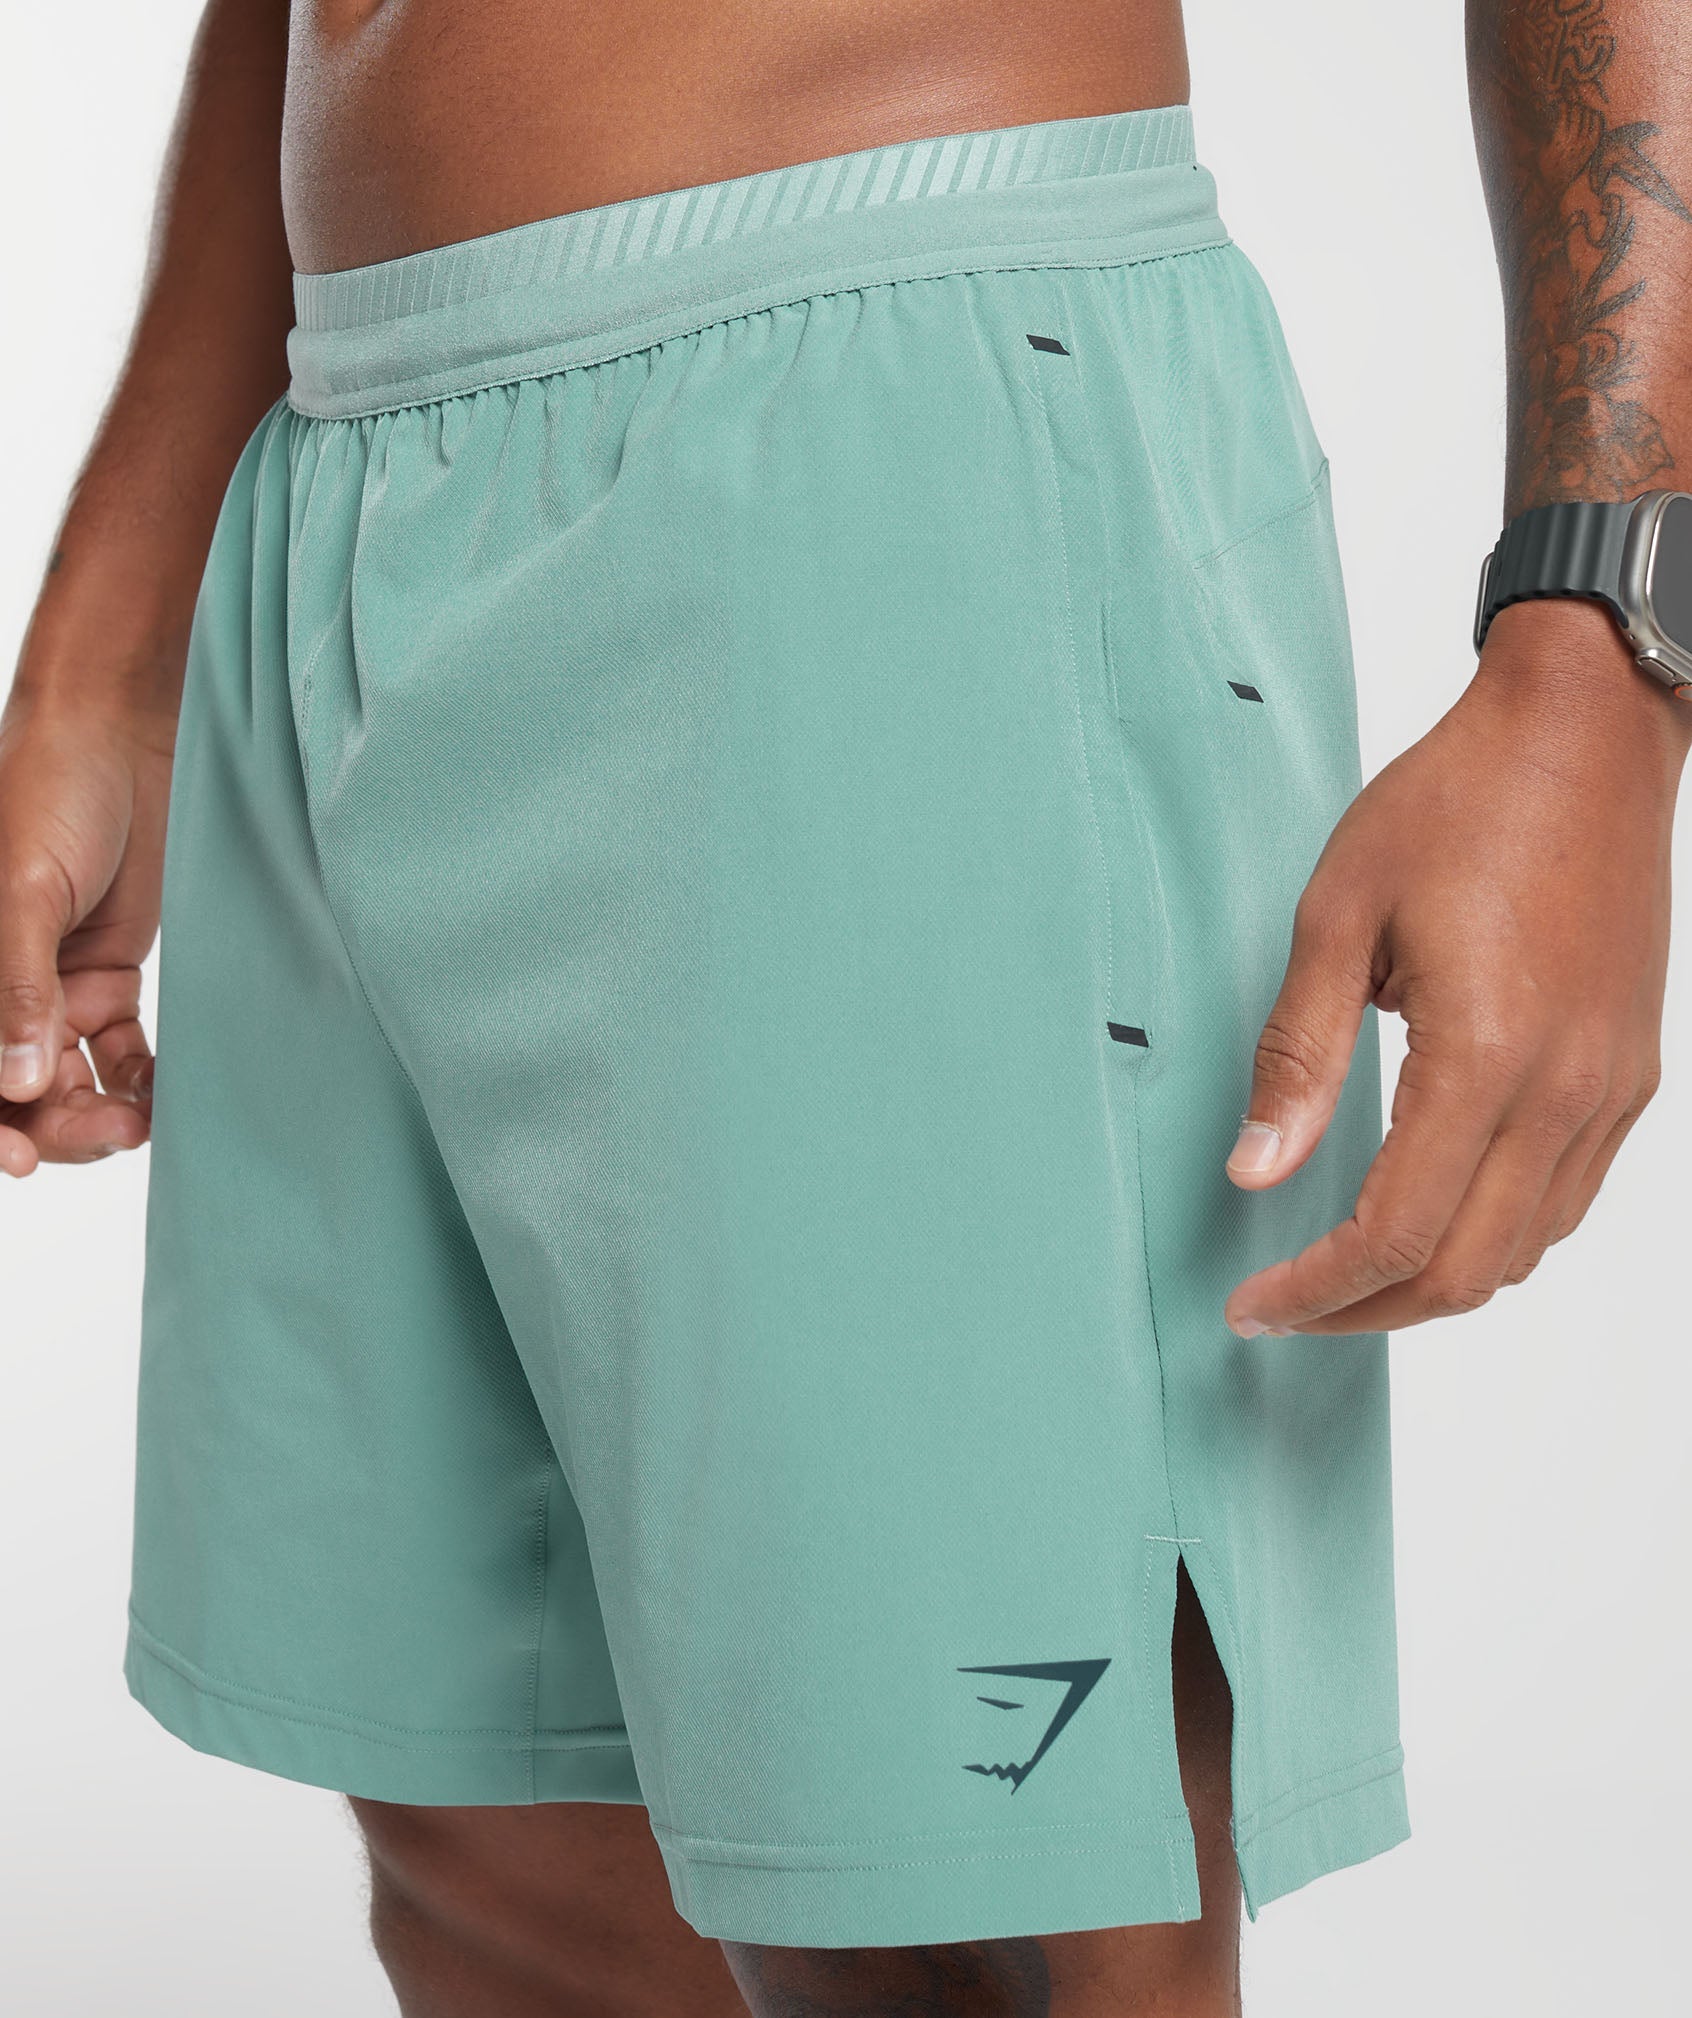 Apex 7" Hybrid Shorts in Duck Egg Blue - view 5